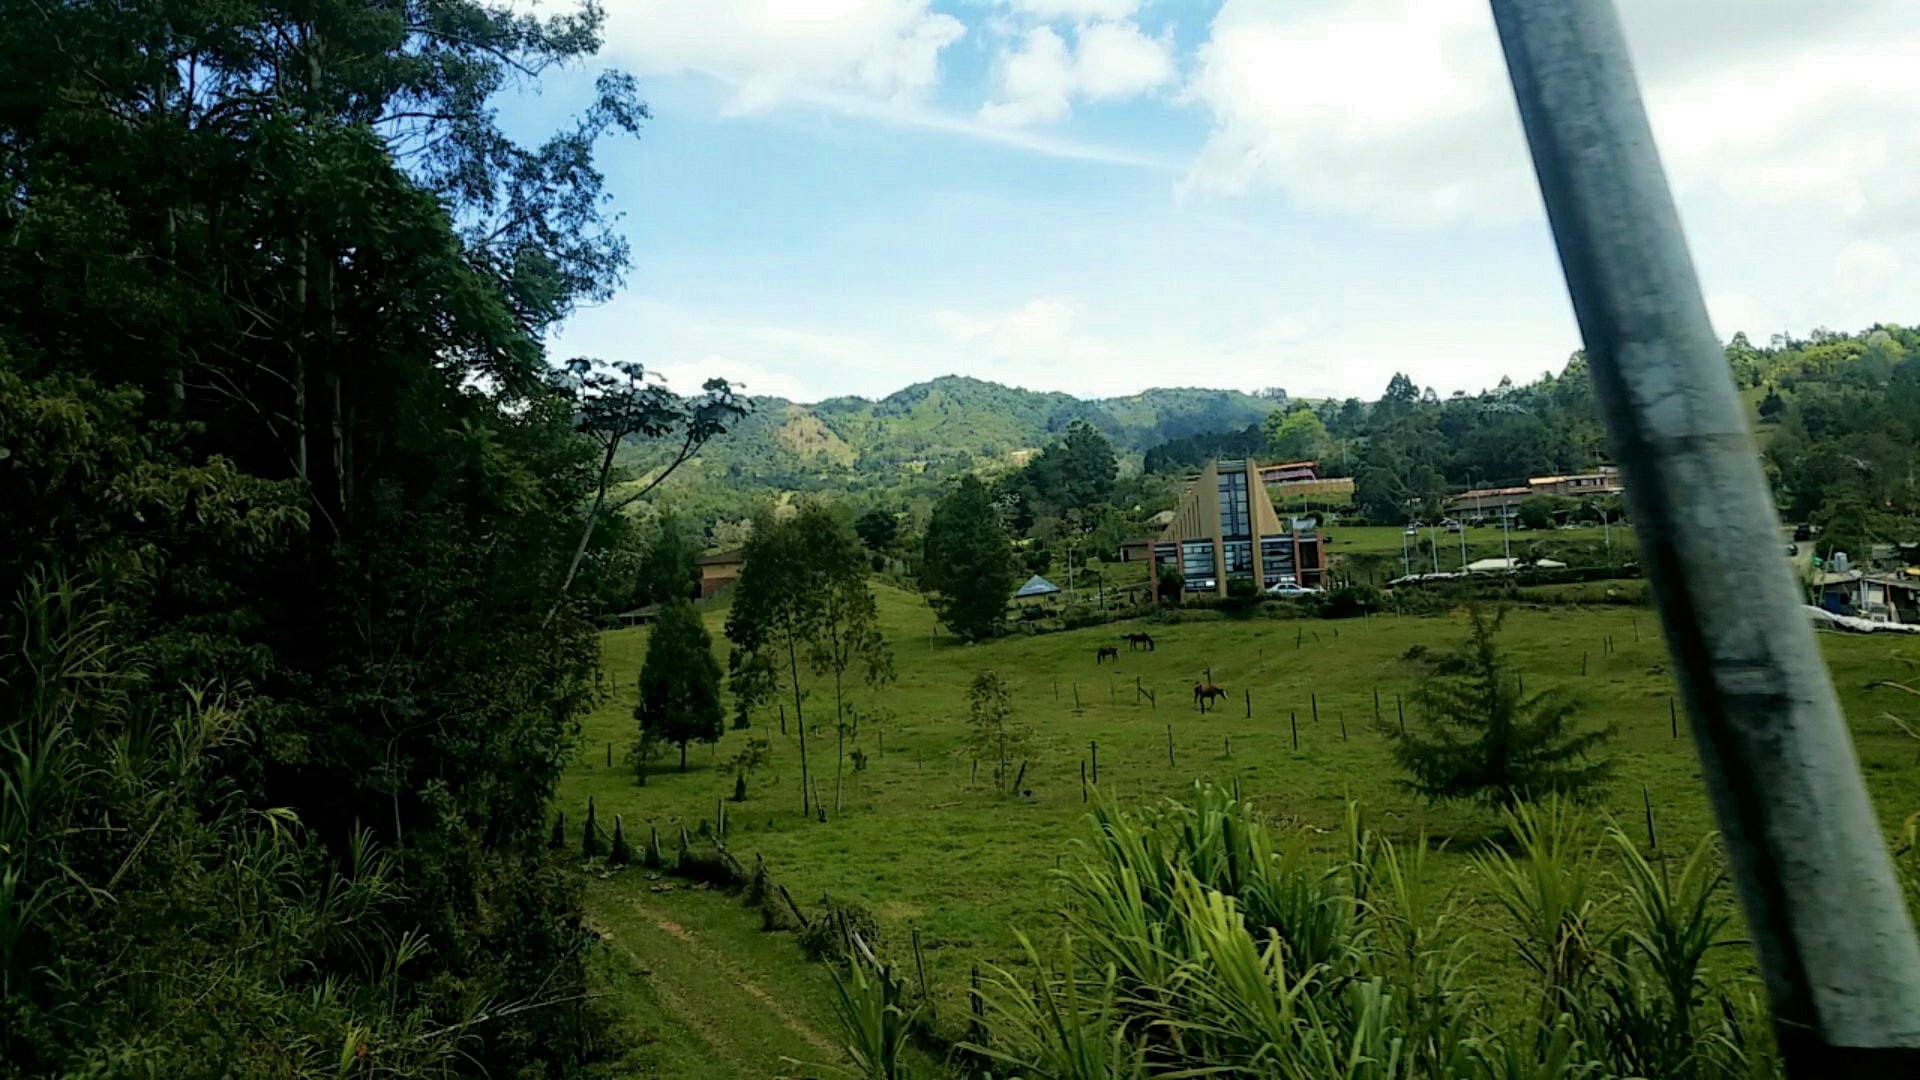 View of the Medellin countryside